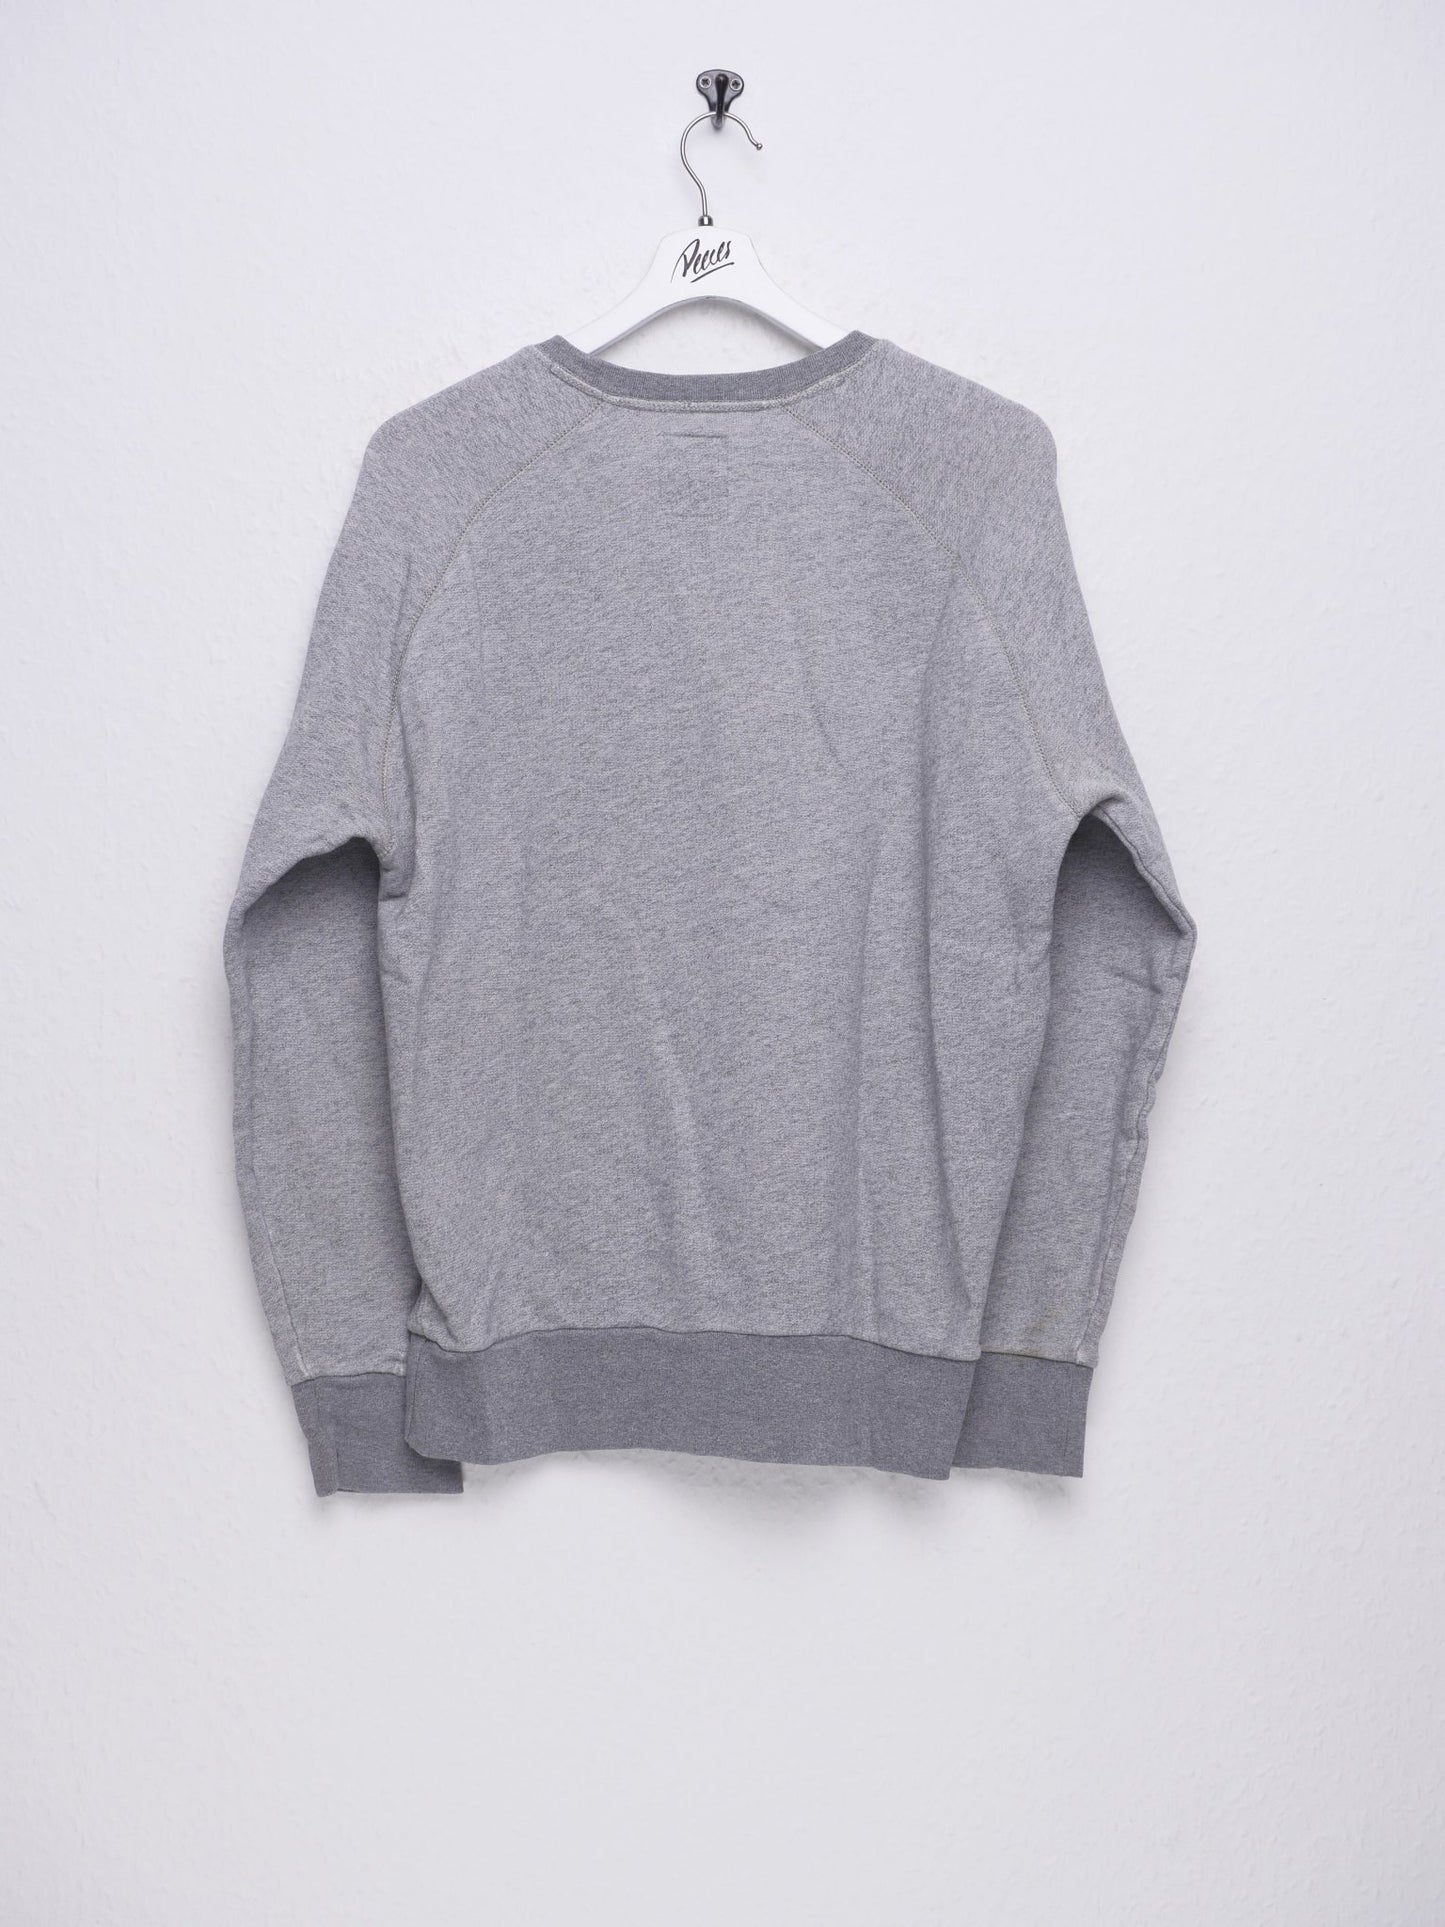 Levis embroidered Logo basic grey Sweater - Peeces